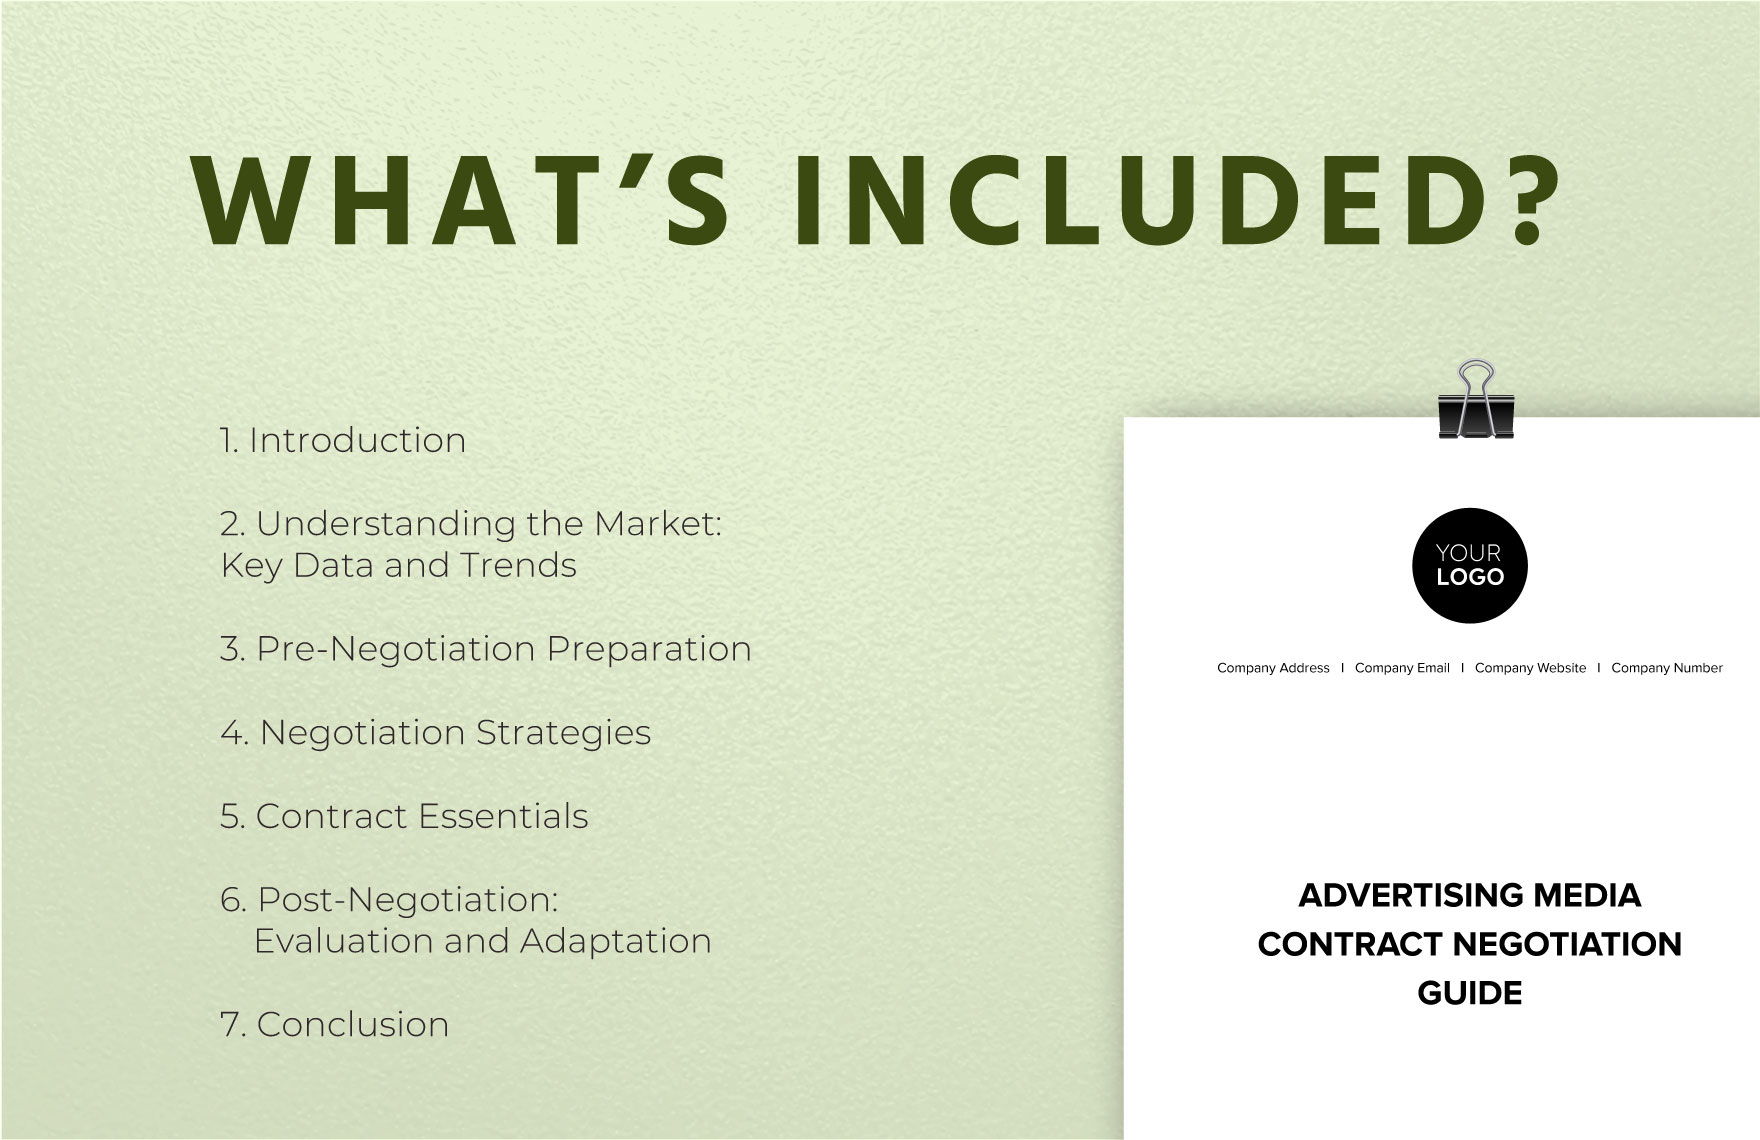 Advertising Media Contract Negotiation Guide Template